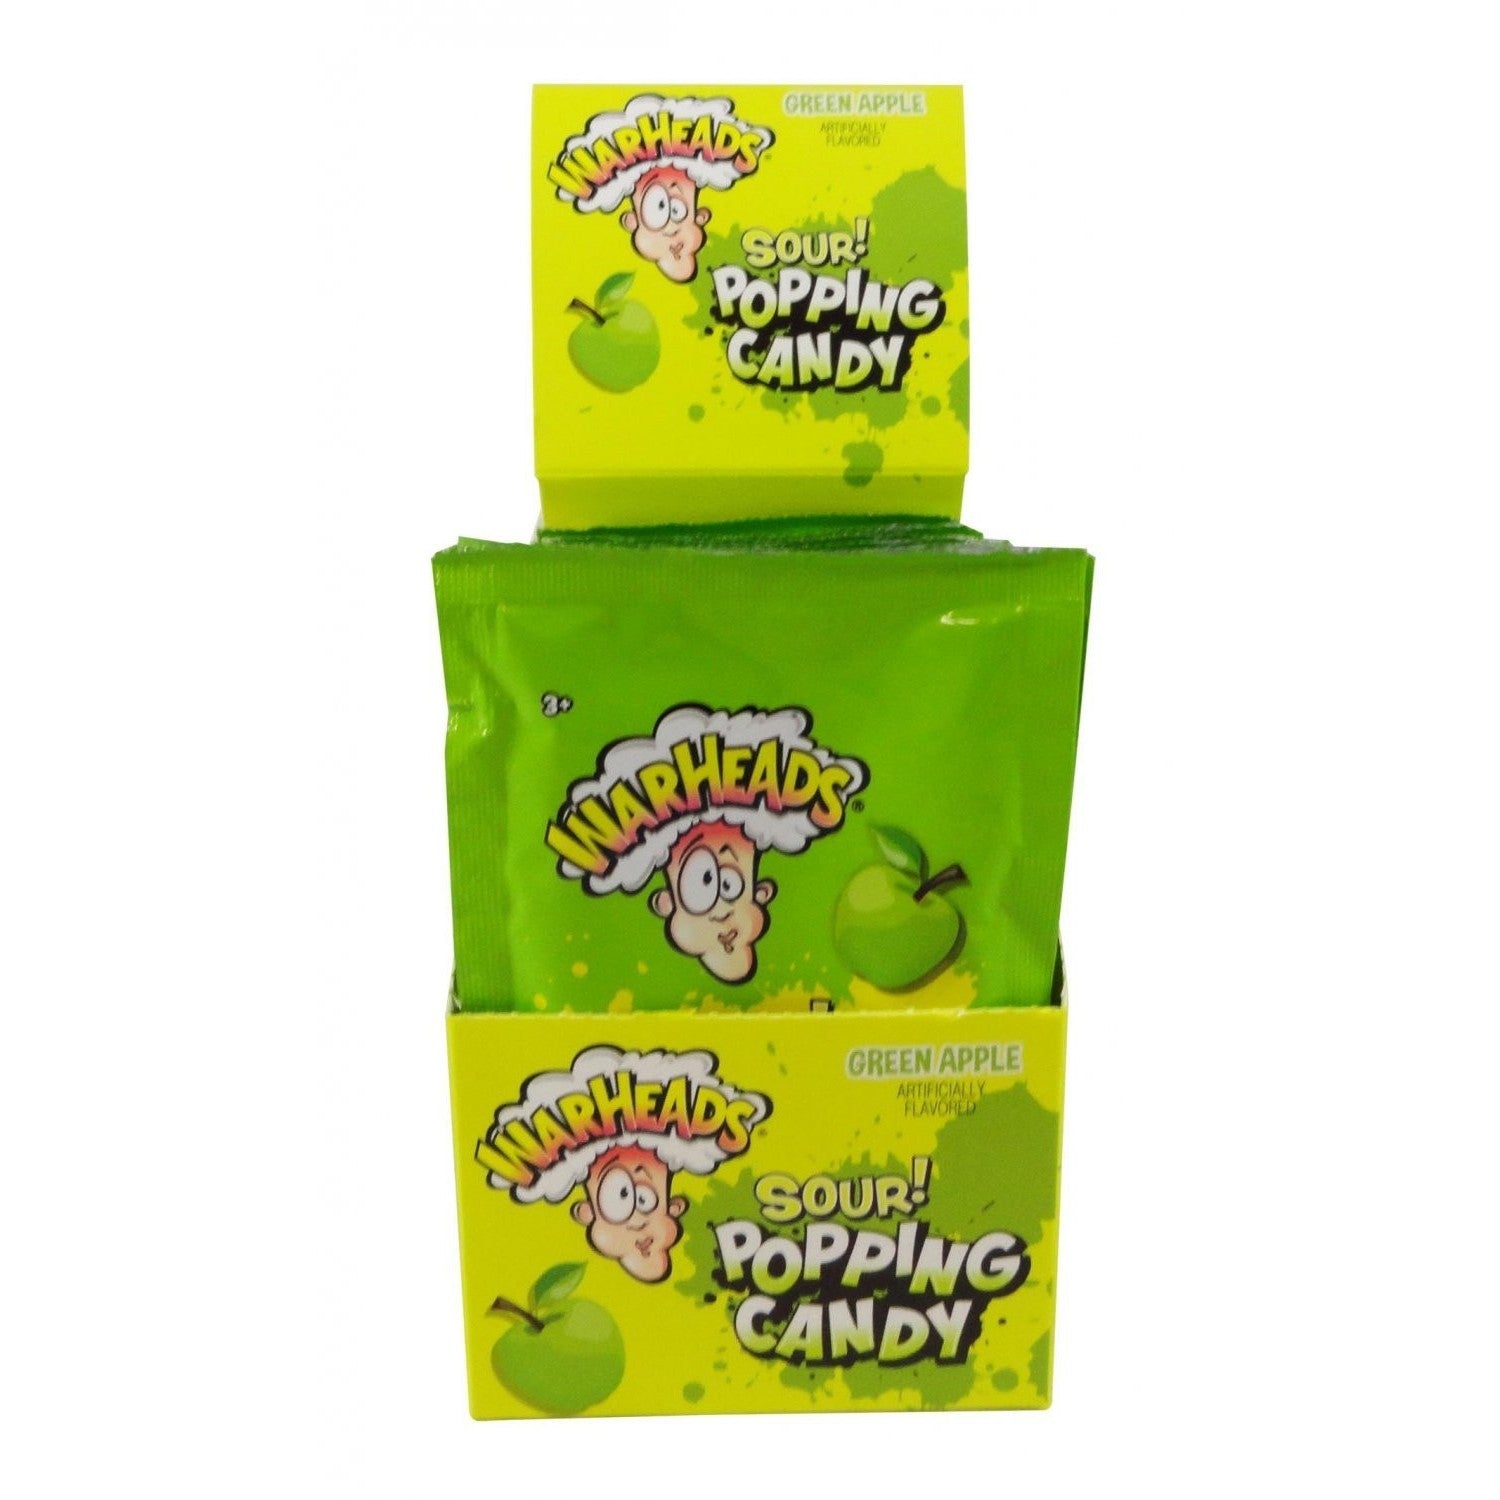 Warheads Sour Popping Candy Blue Raspberry